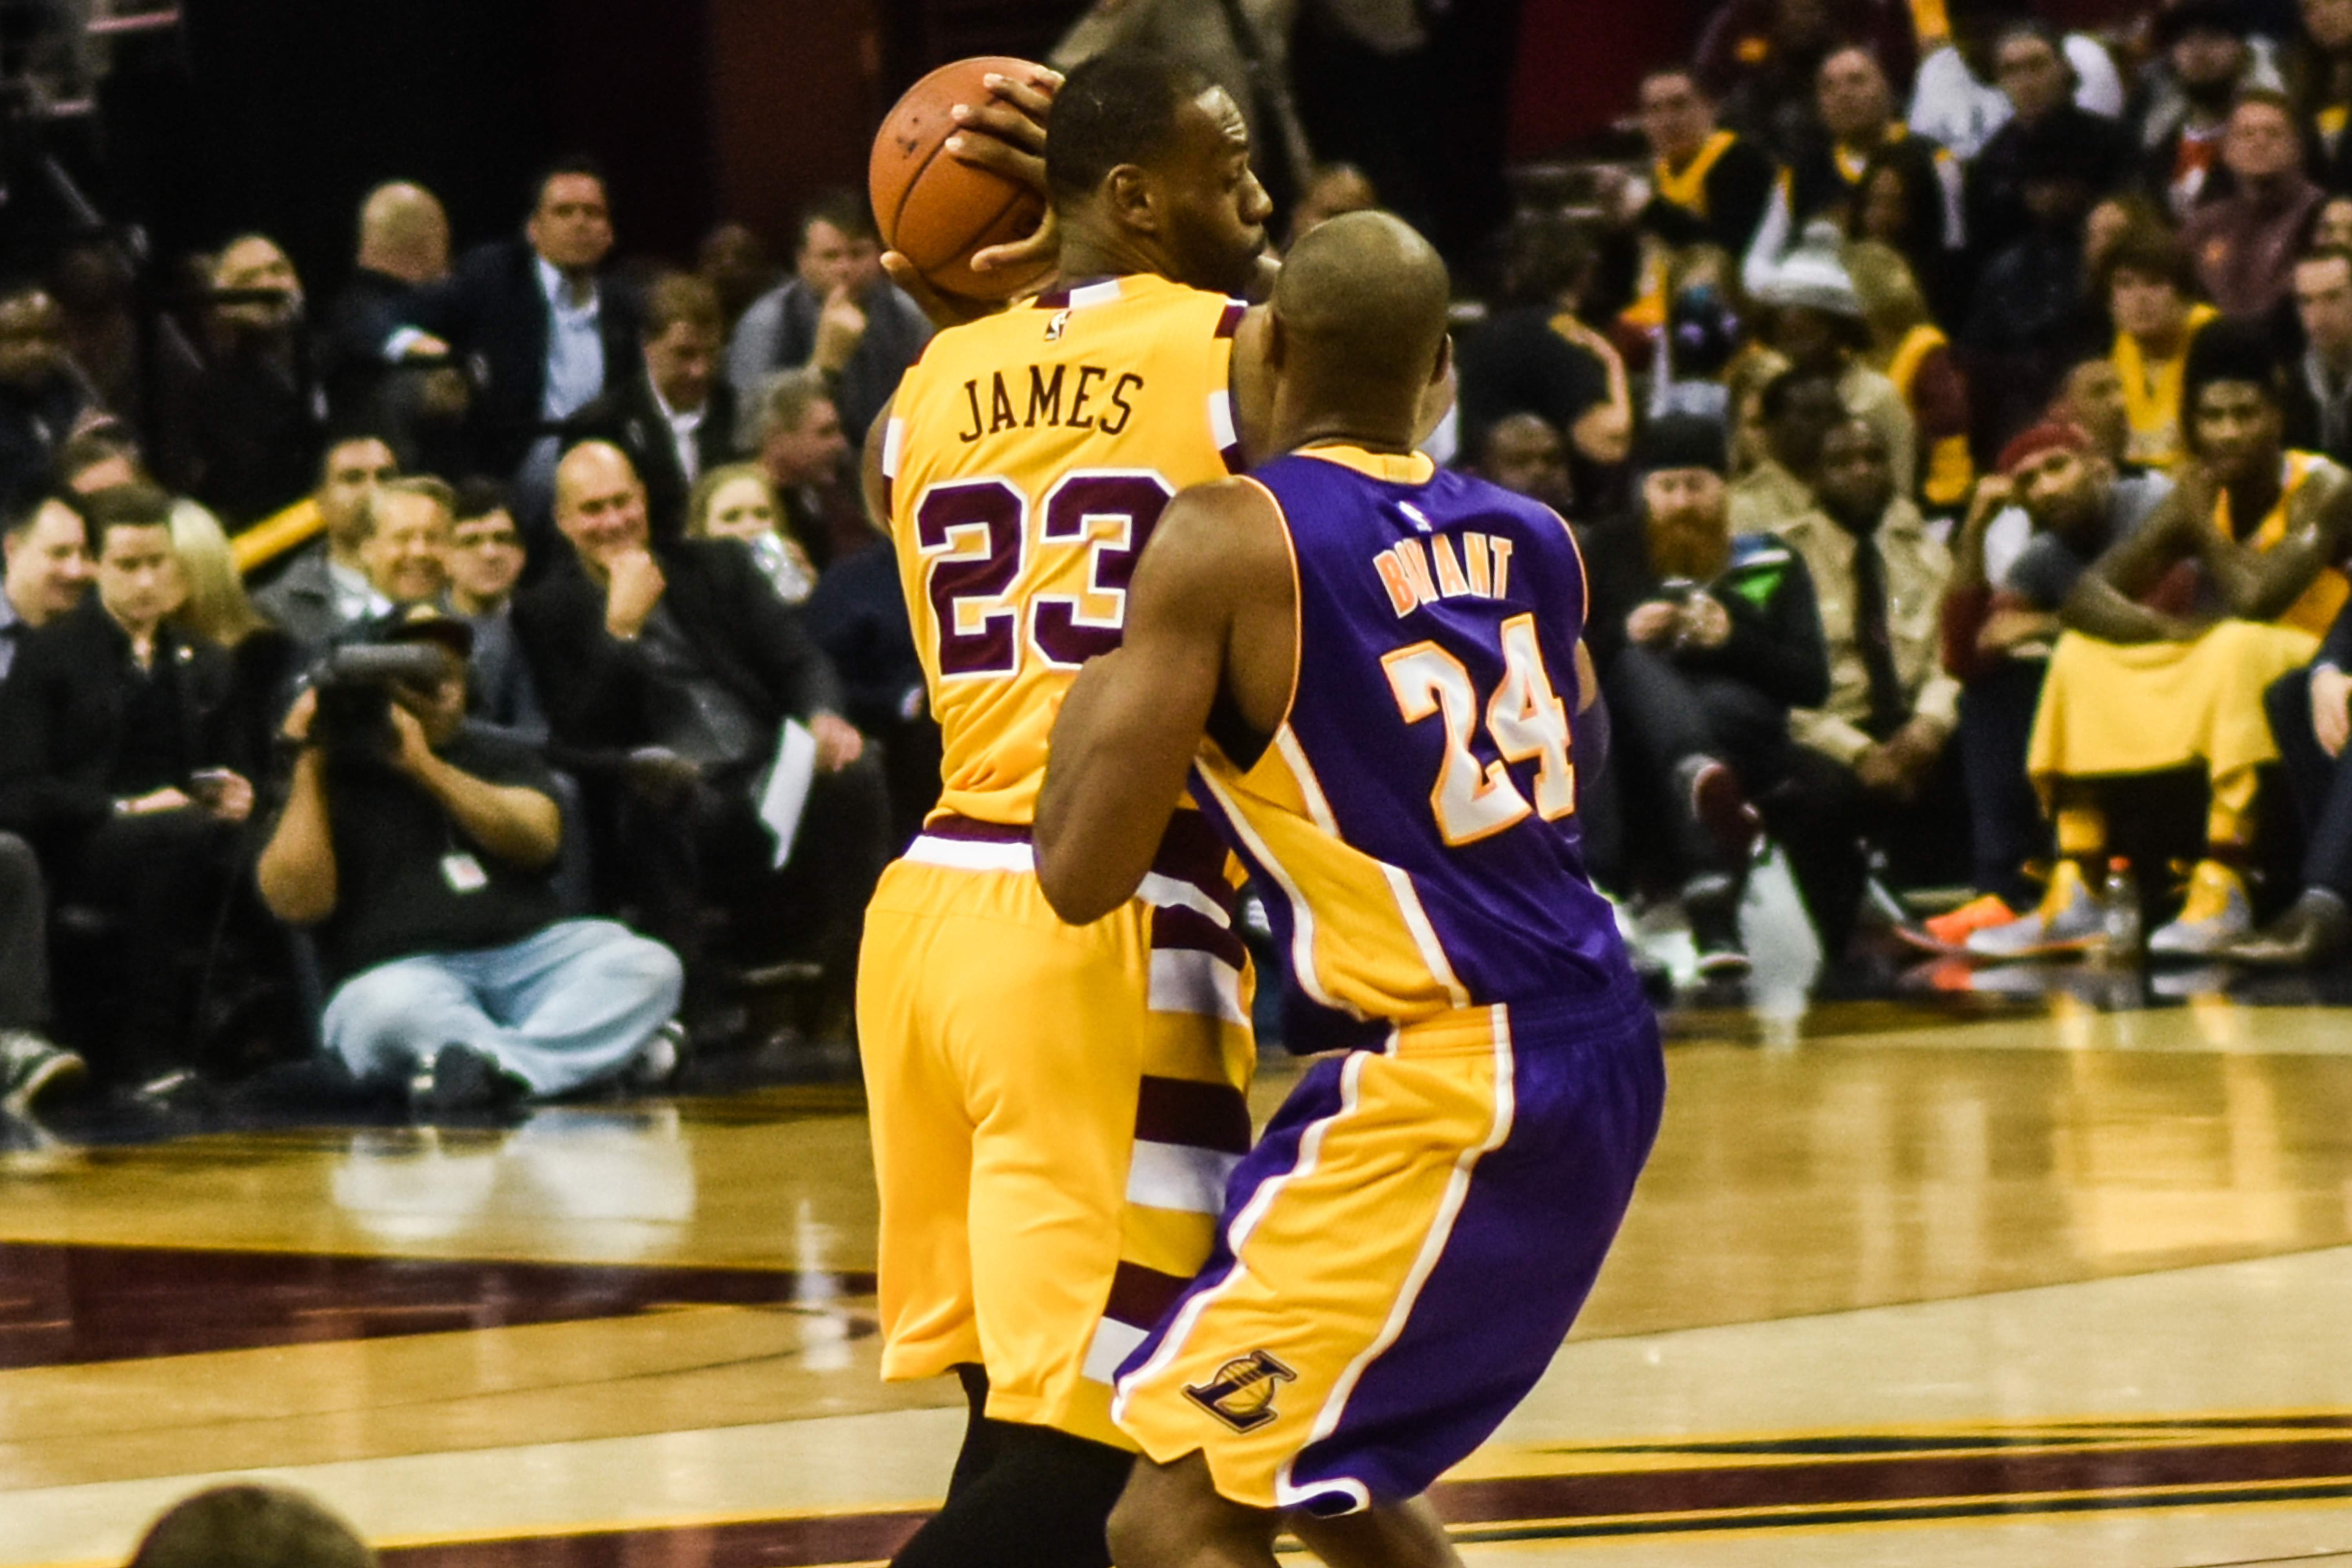 LeBron James and Kobe Bryant Had an Unspoken Battle During the